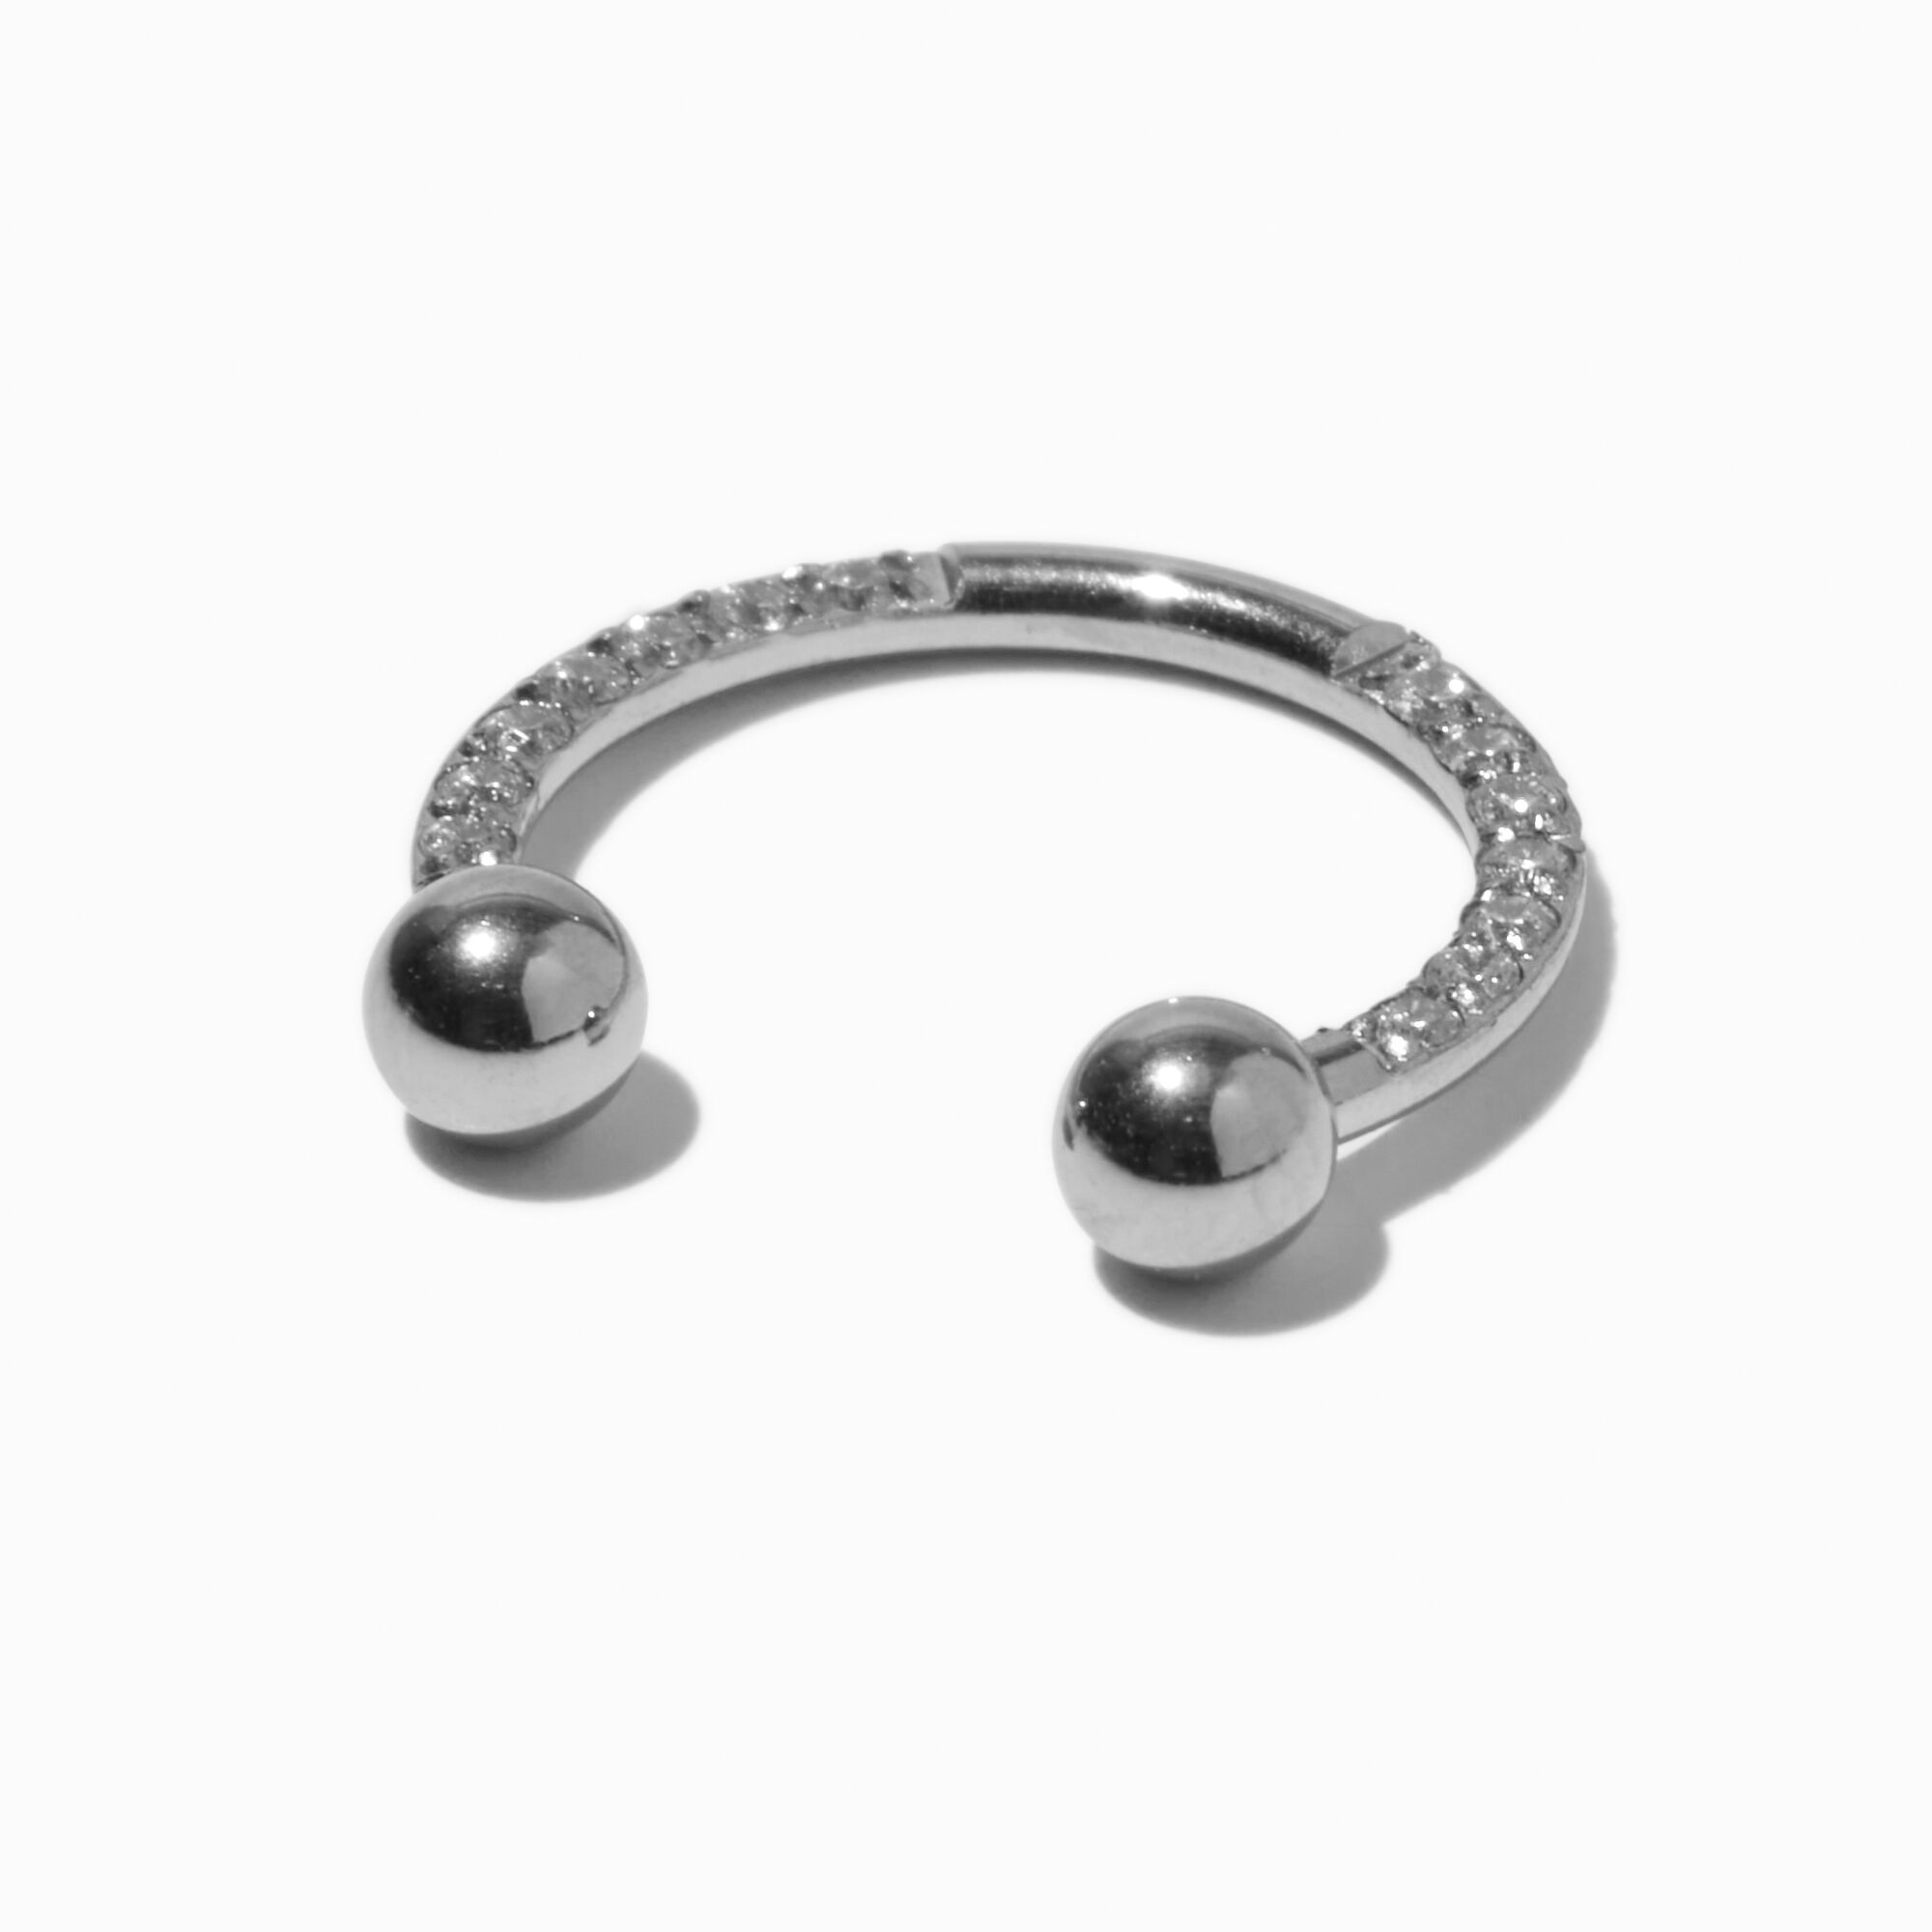 View Claires Tone 16G Crystal Horseshoe Septum Nose Ring Silver information